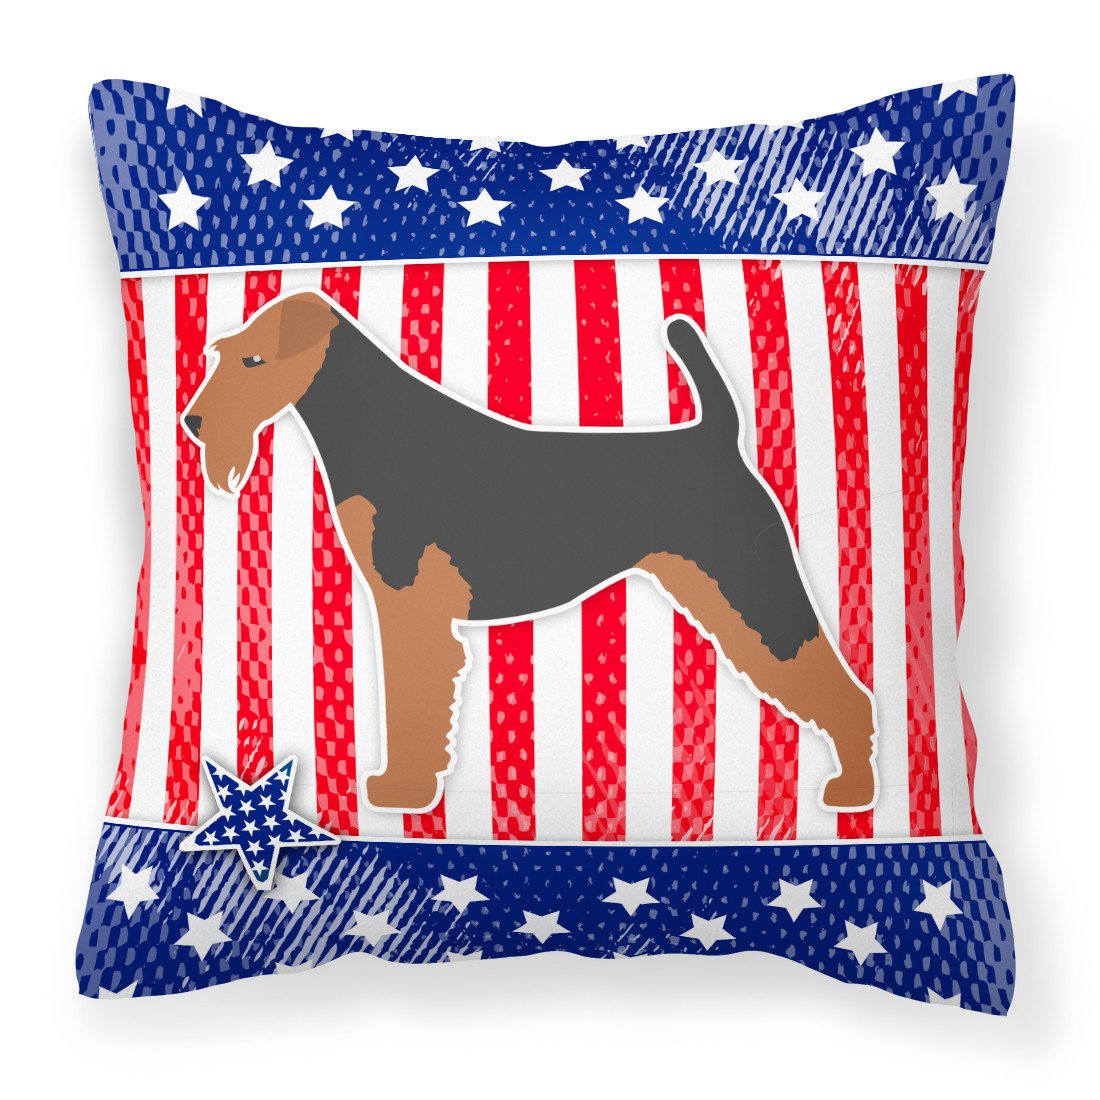 USA Patriotic Welsh Terrier Fabric Decorative Pillow BB3285PW1818 by Caroline's Treasures